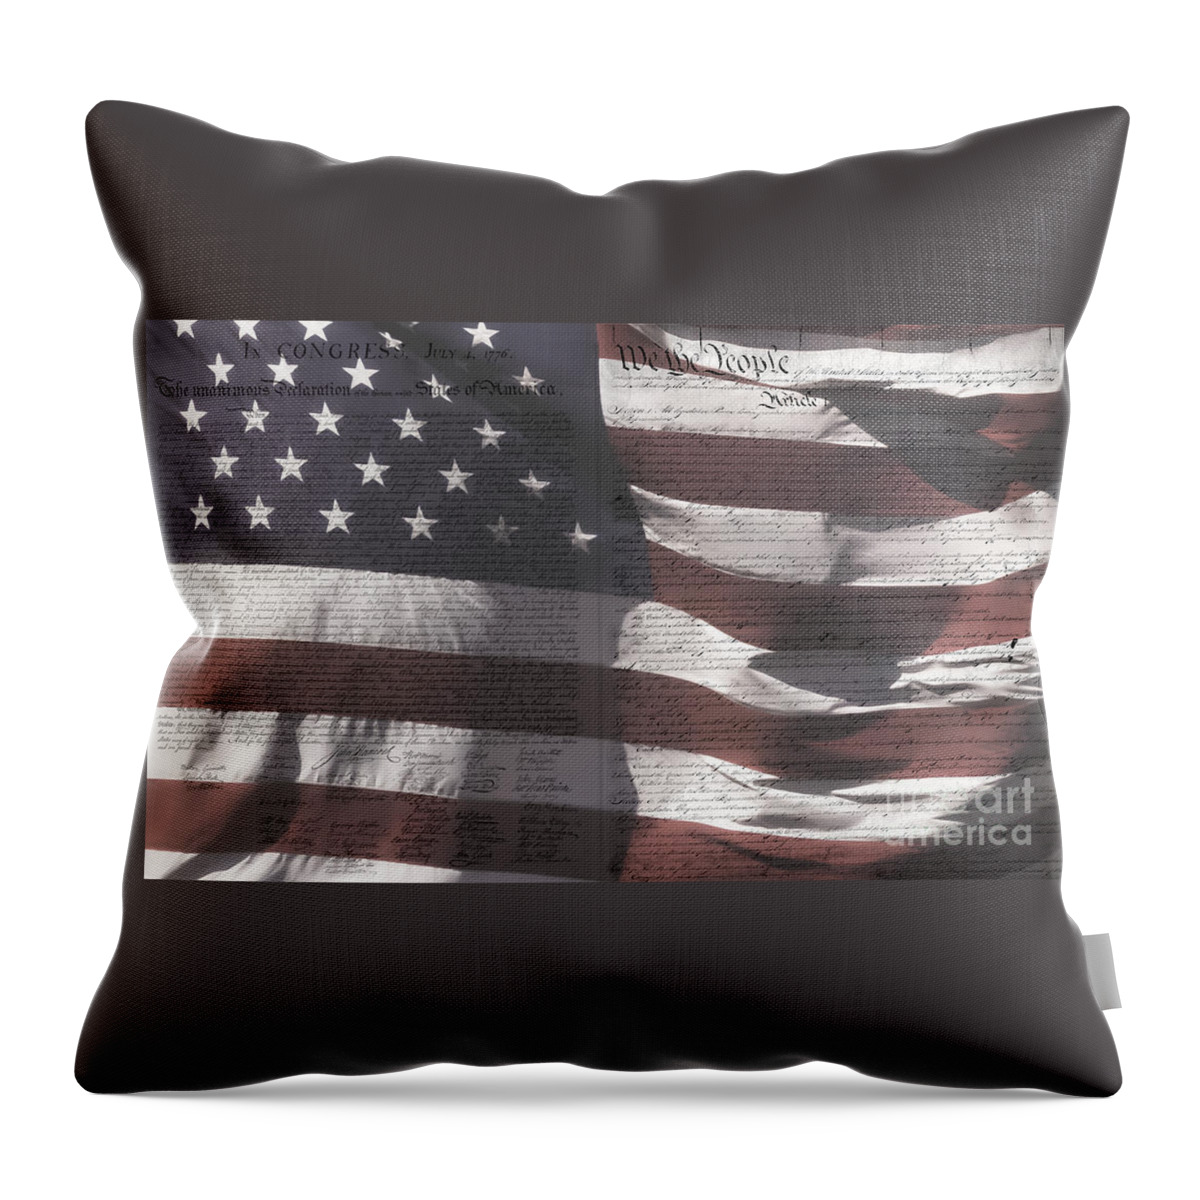 American Throw Pillow featuring the photograph Historical Documents on US Flag by Imagery by Charly